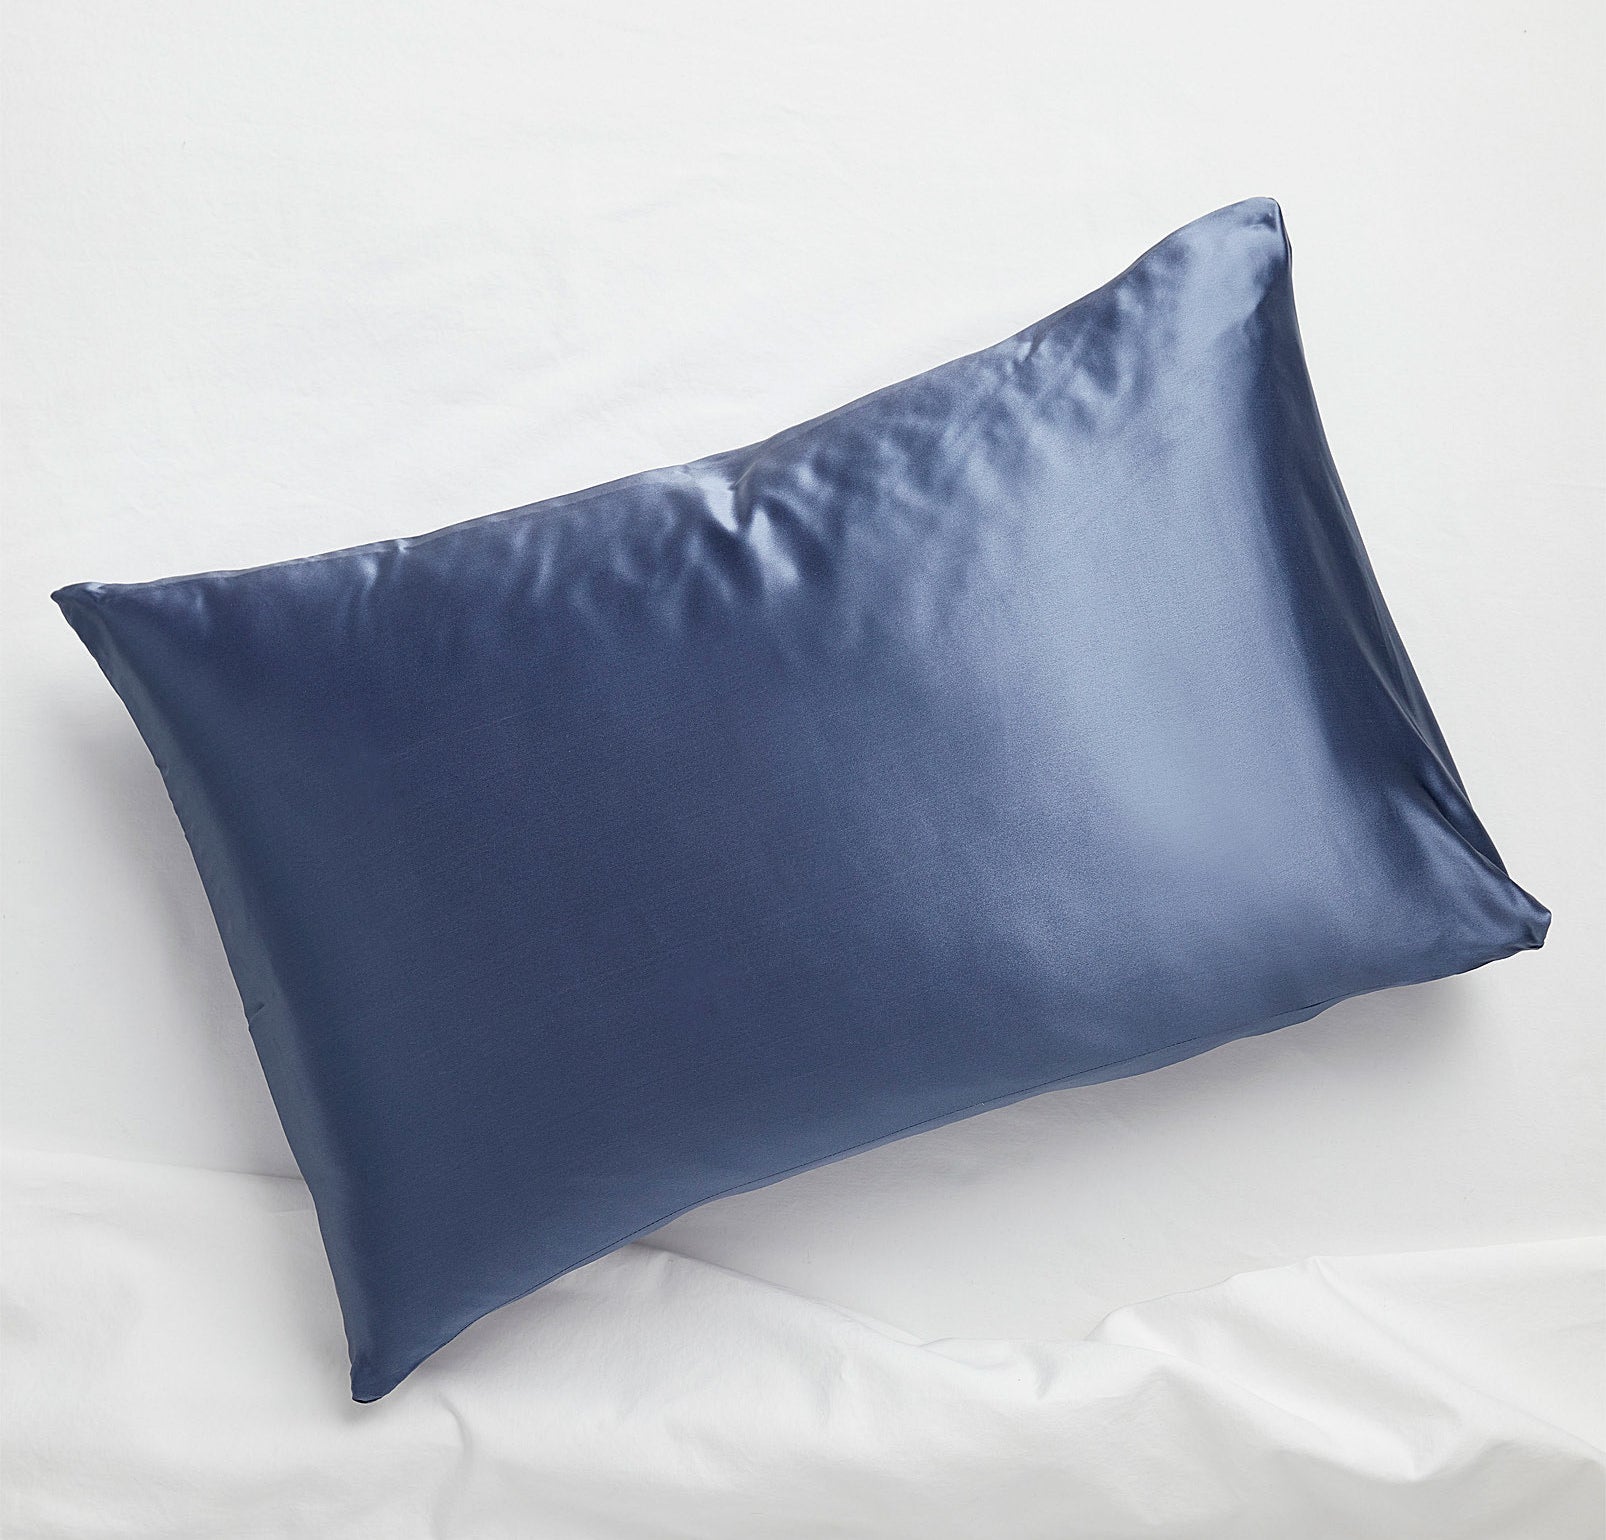 A silk pillowcase on a pillow on a bed